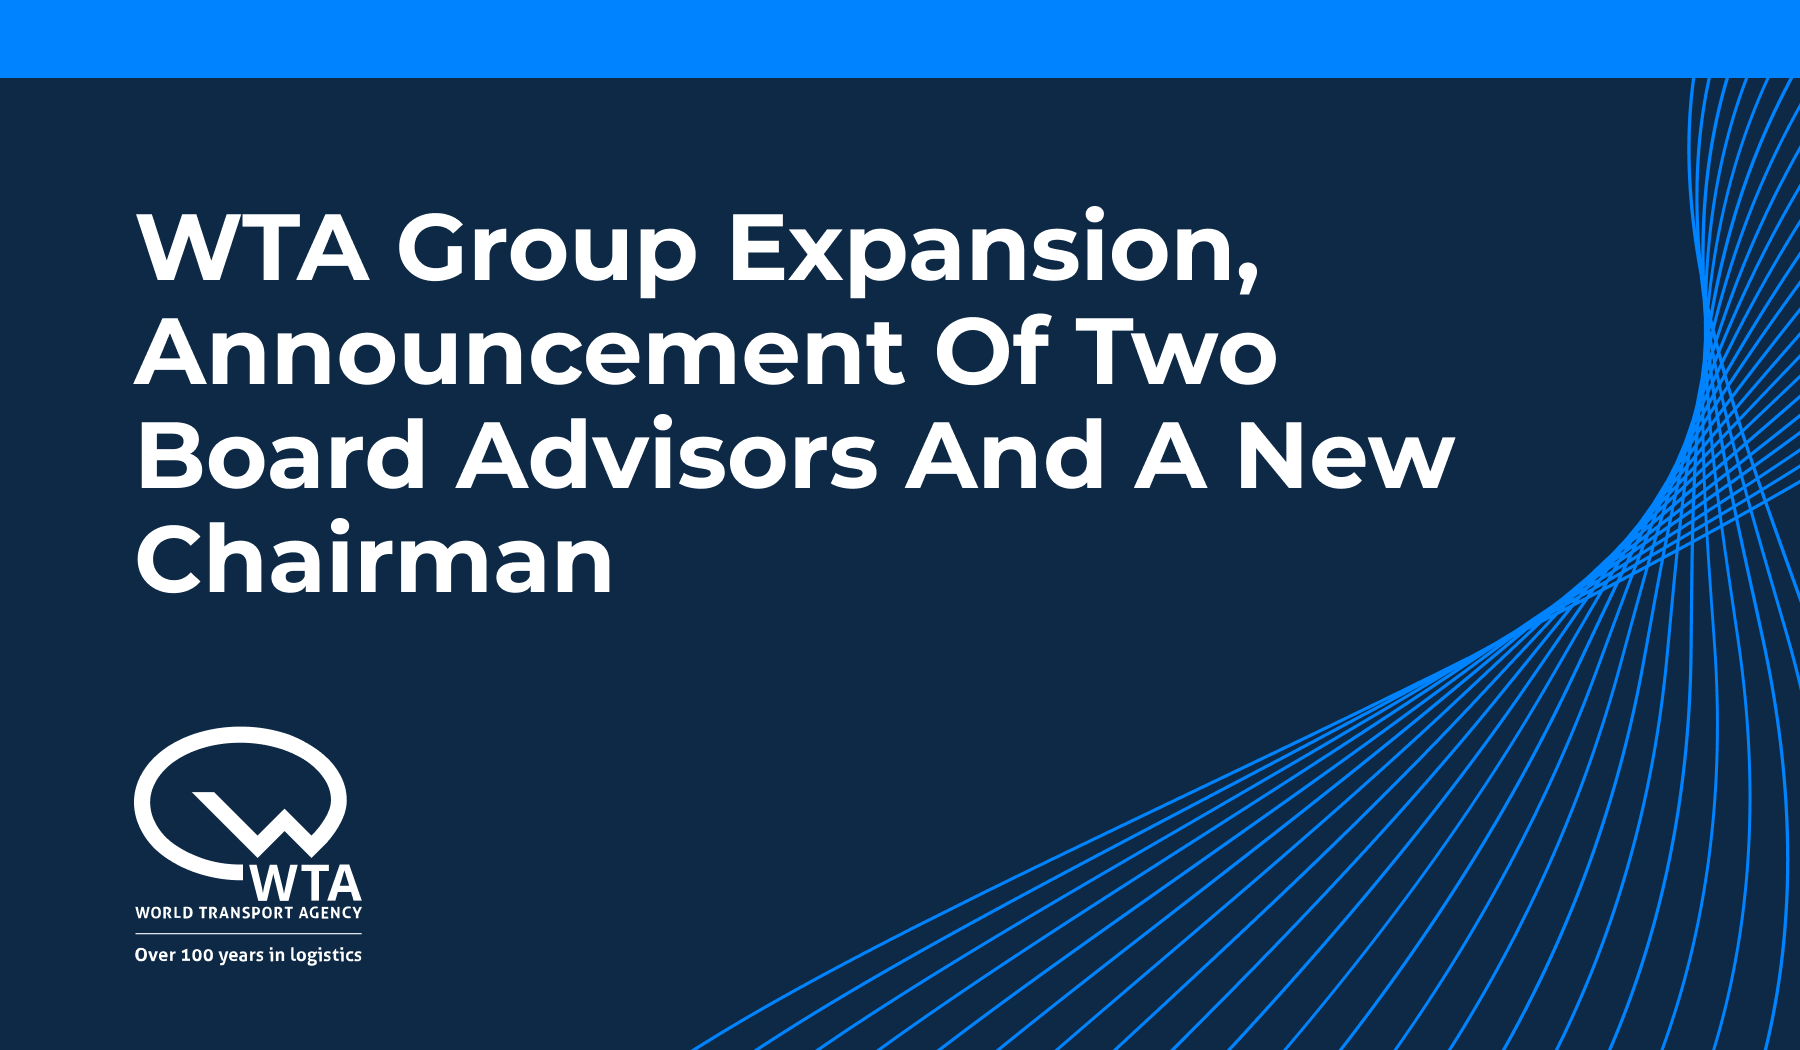 WTA Group Expansion, Announcing Two Board Advisors and a New Chairman